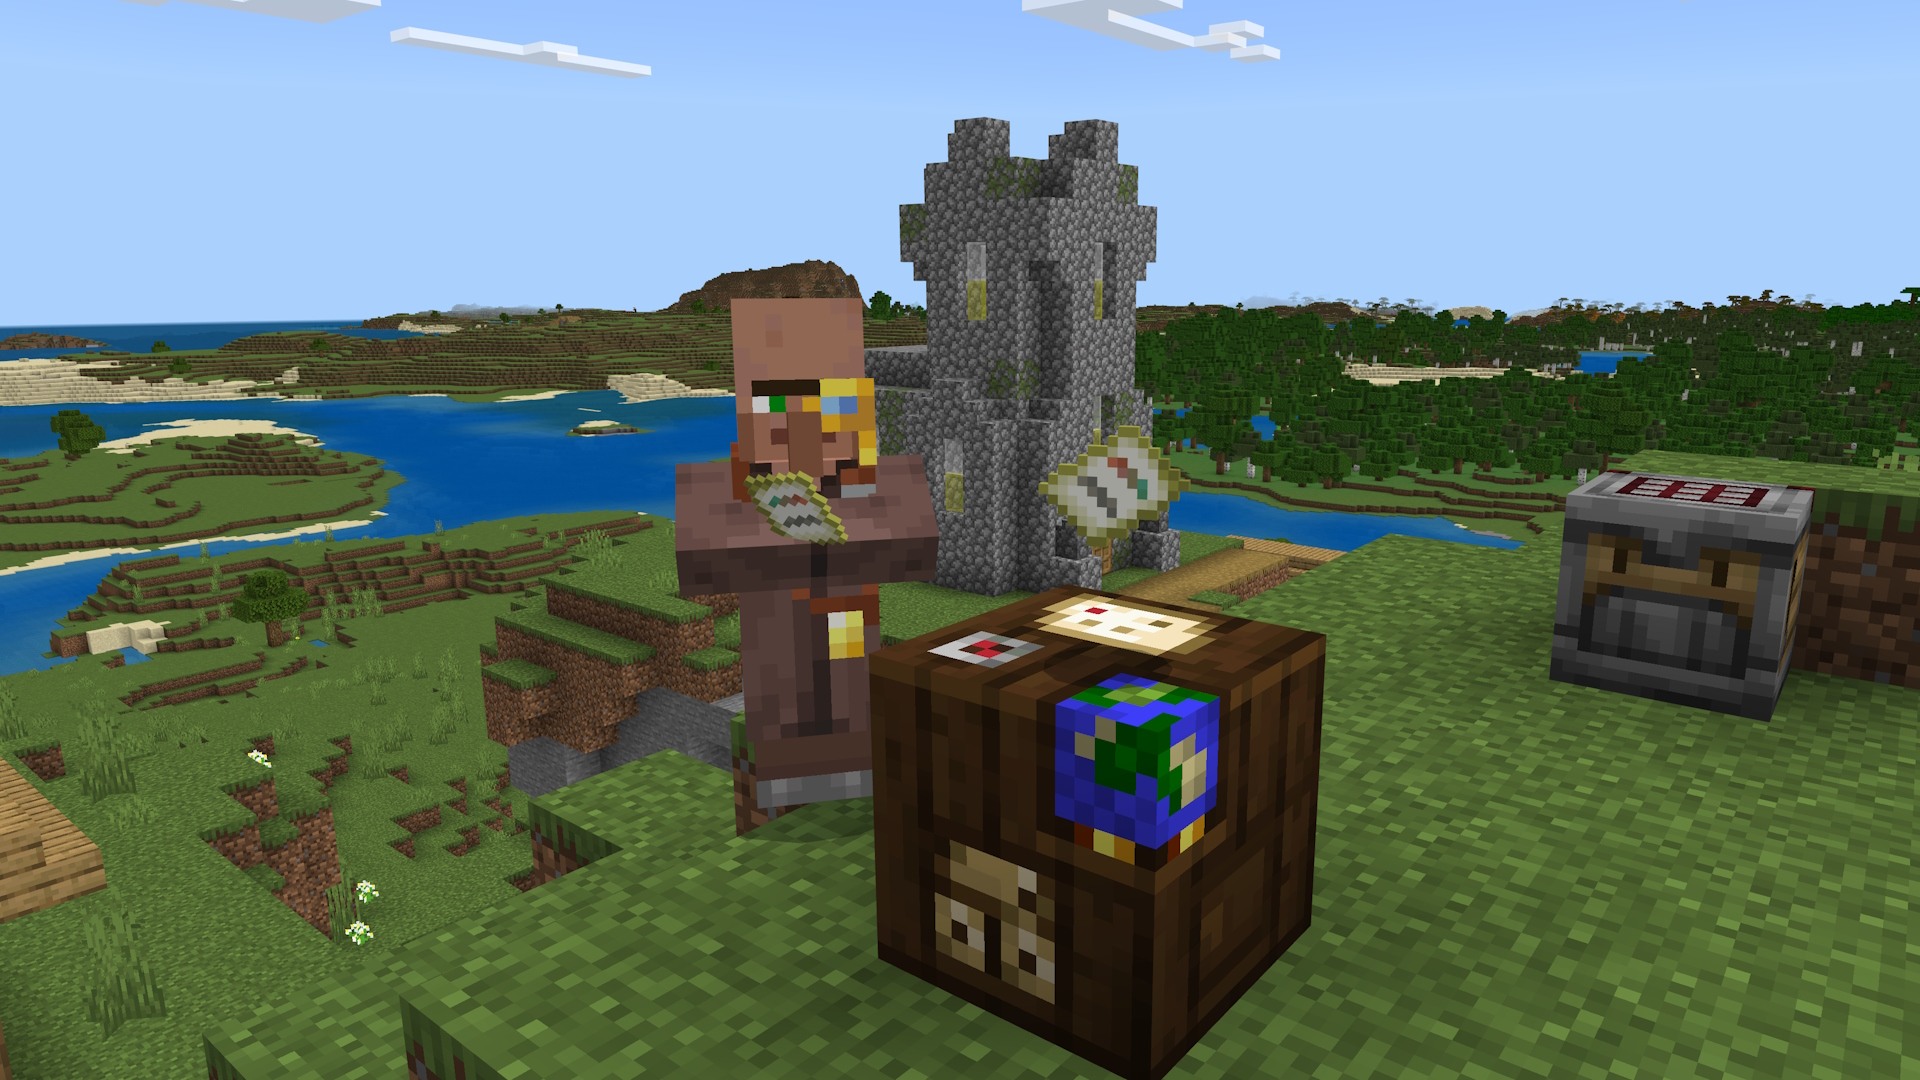 A Minecraft cartographer villager is standing next to a cartography table in a village, holding a trial chamber map.